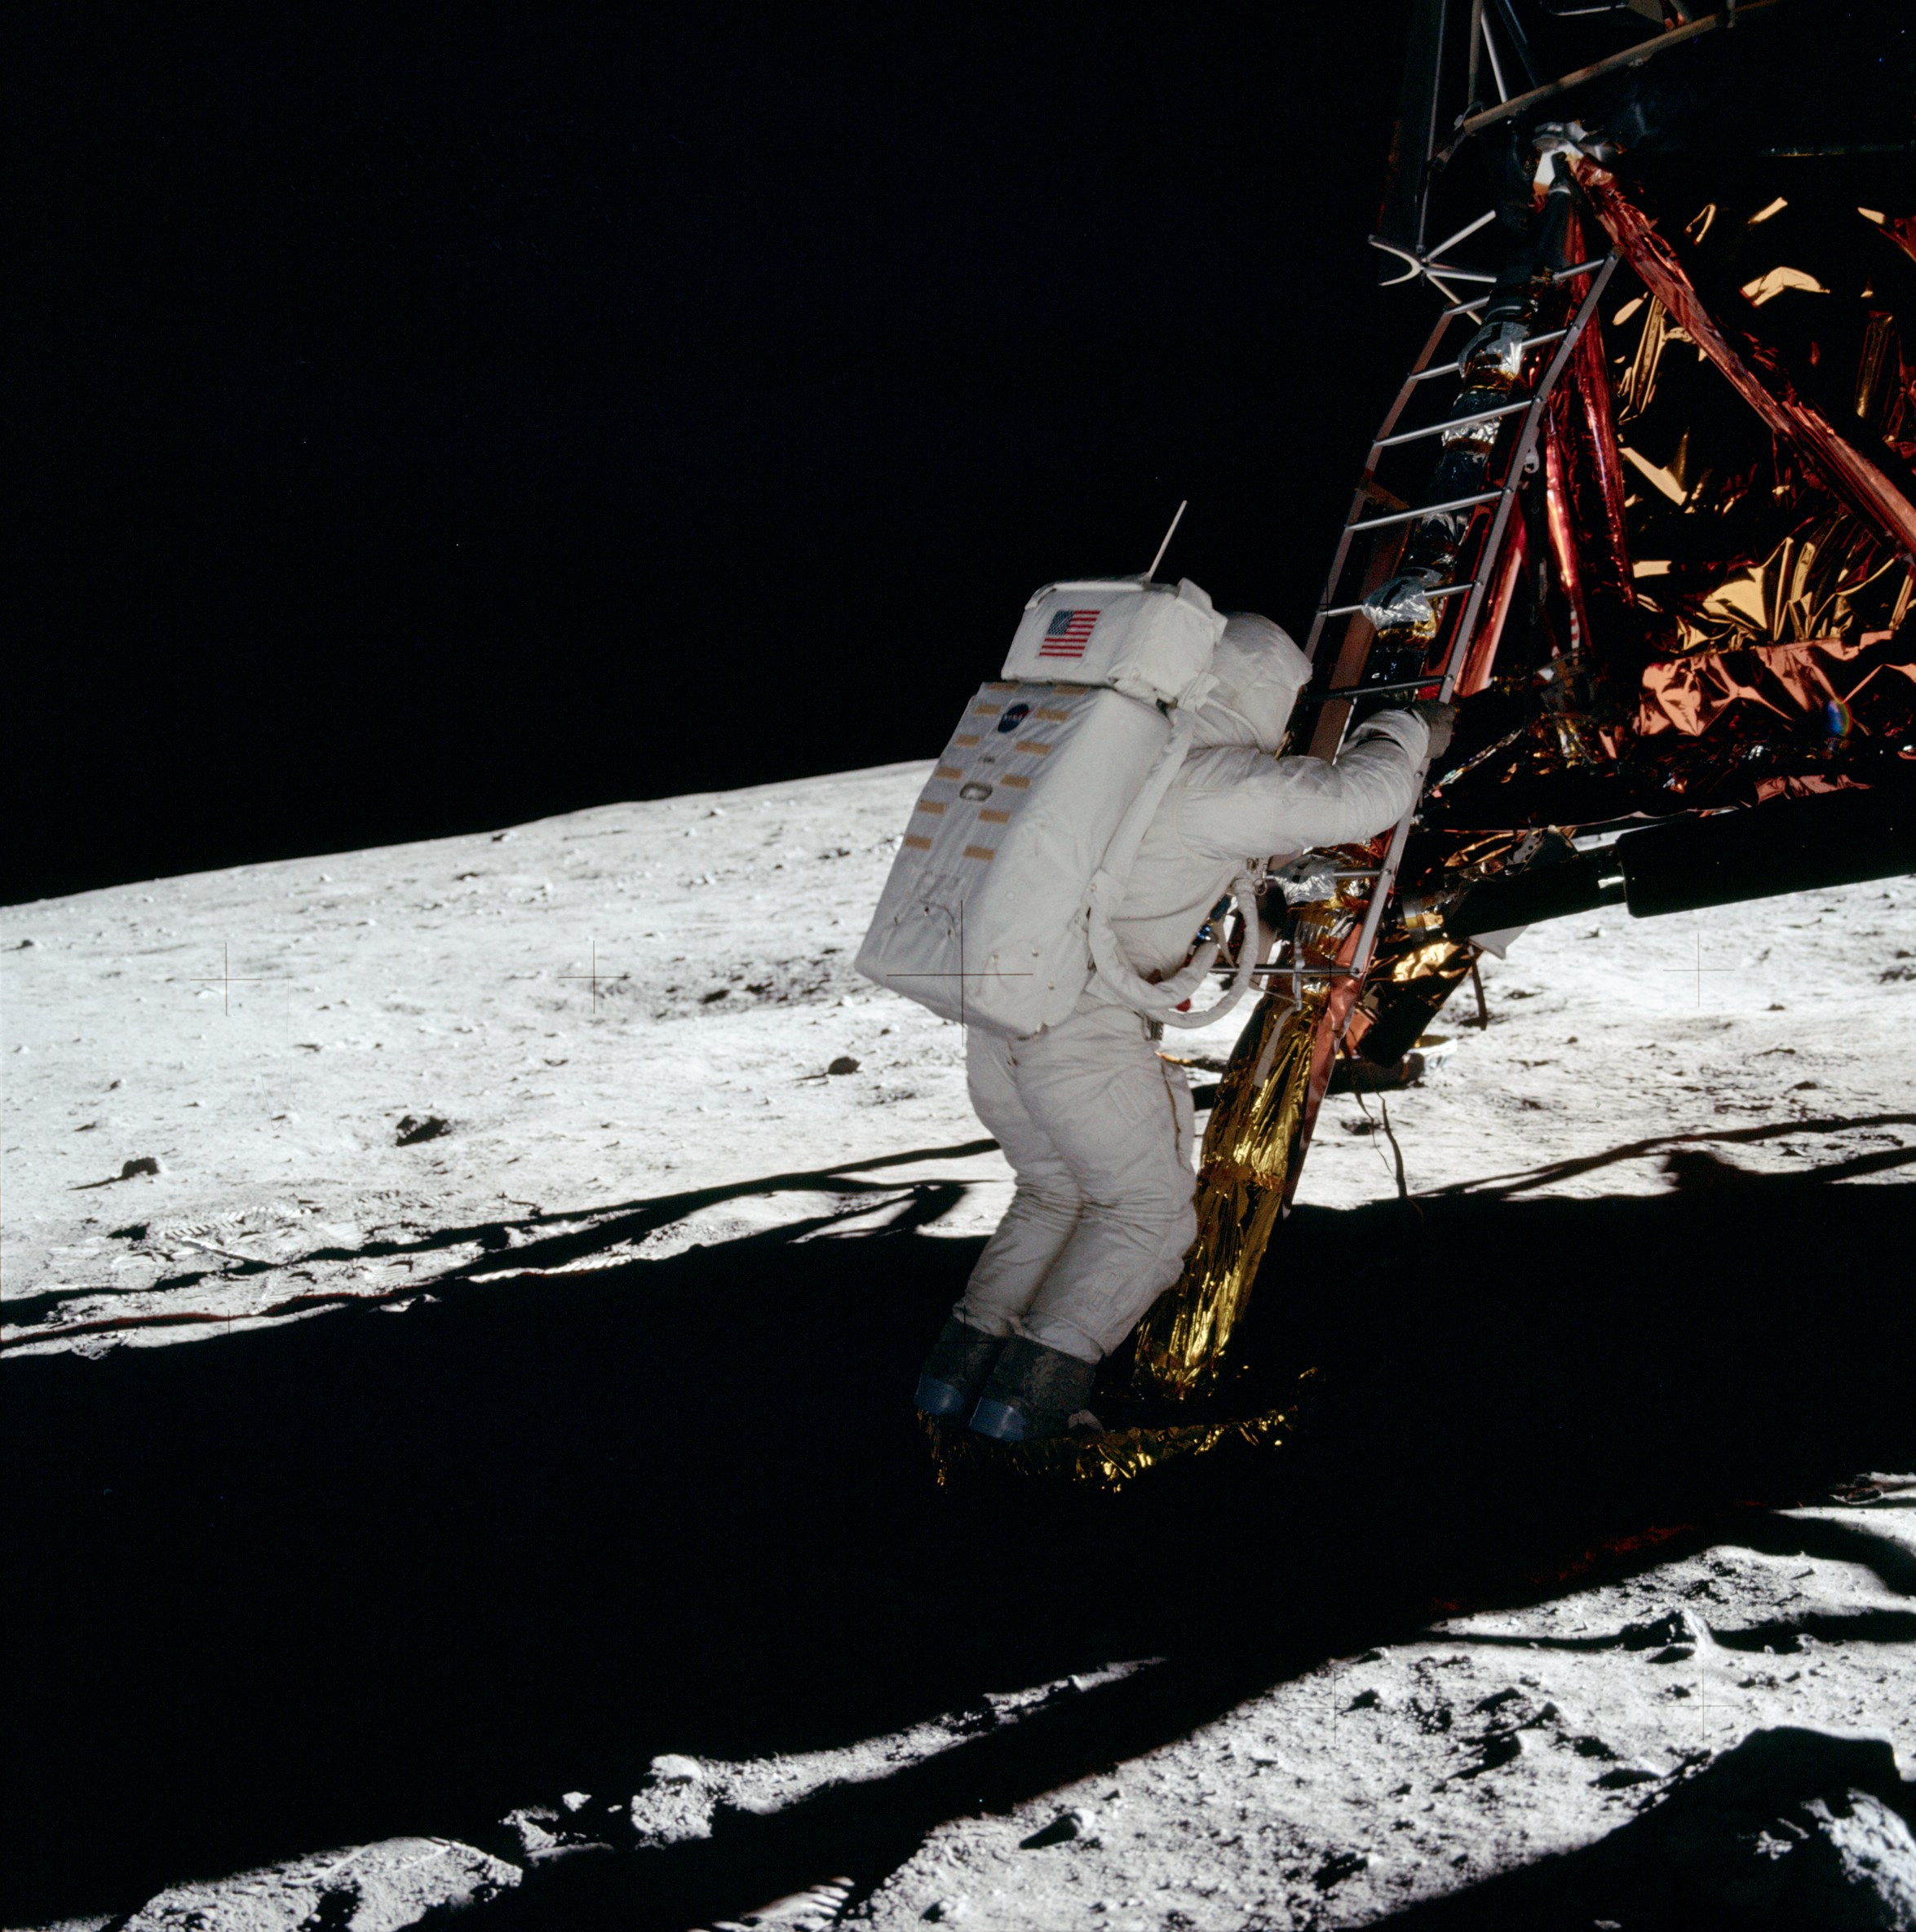 Armstrong on the moon. Астронавты миссии Аполлон 11. Аполлон 1969 Аполлон 11.